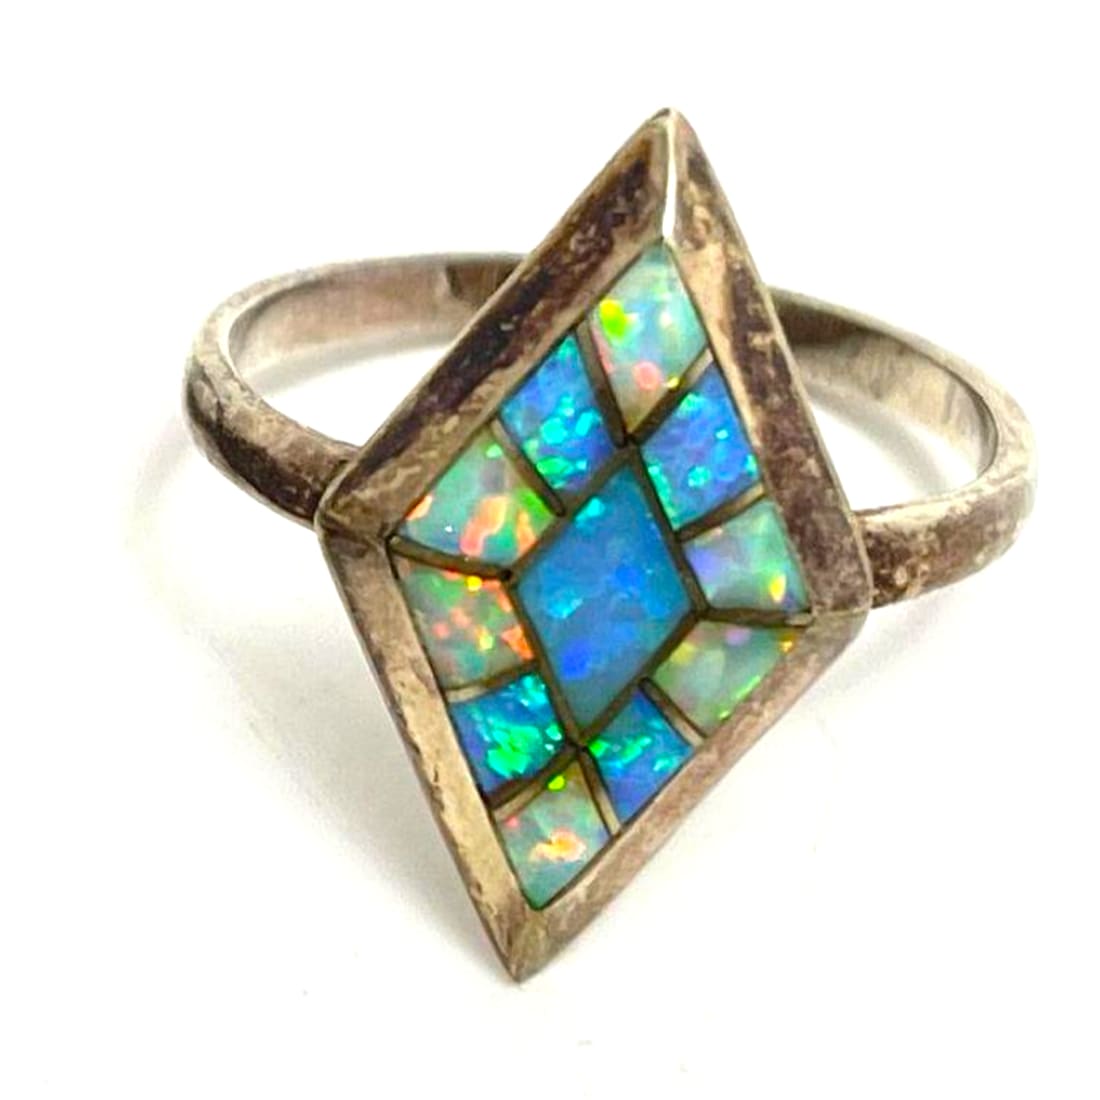 Zuni Opal Inlay Ring Size 7.5 Sterling Silver Vintage Native